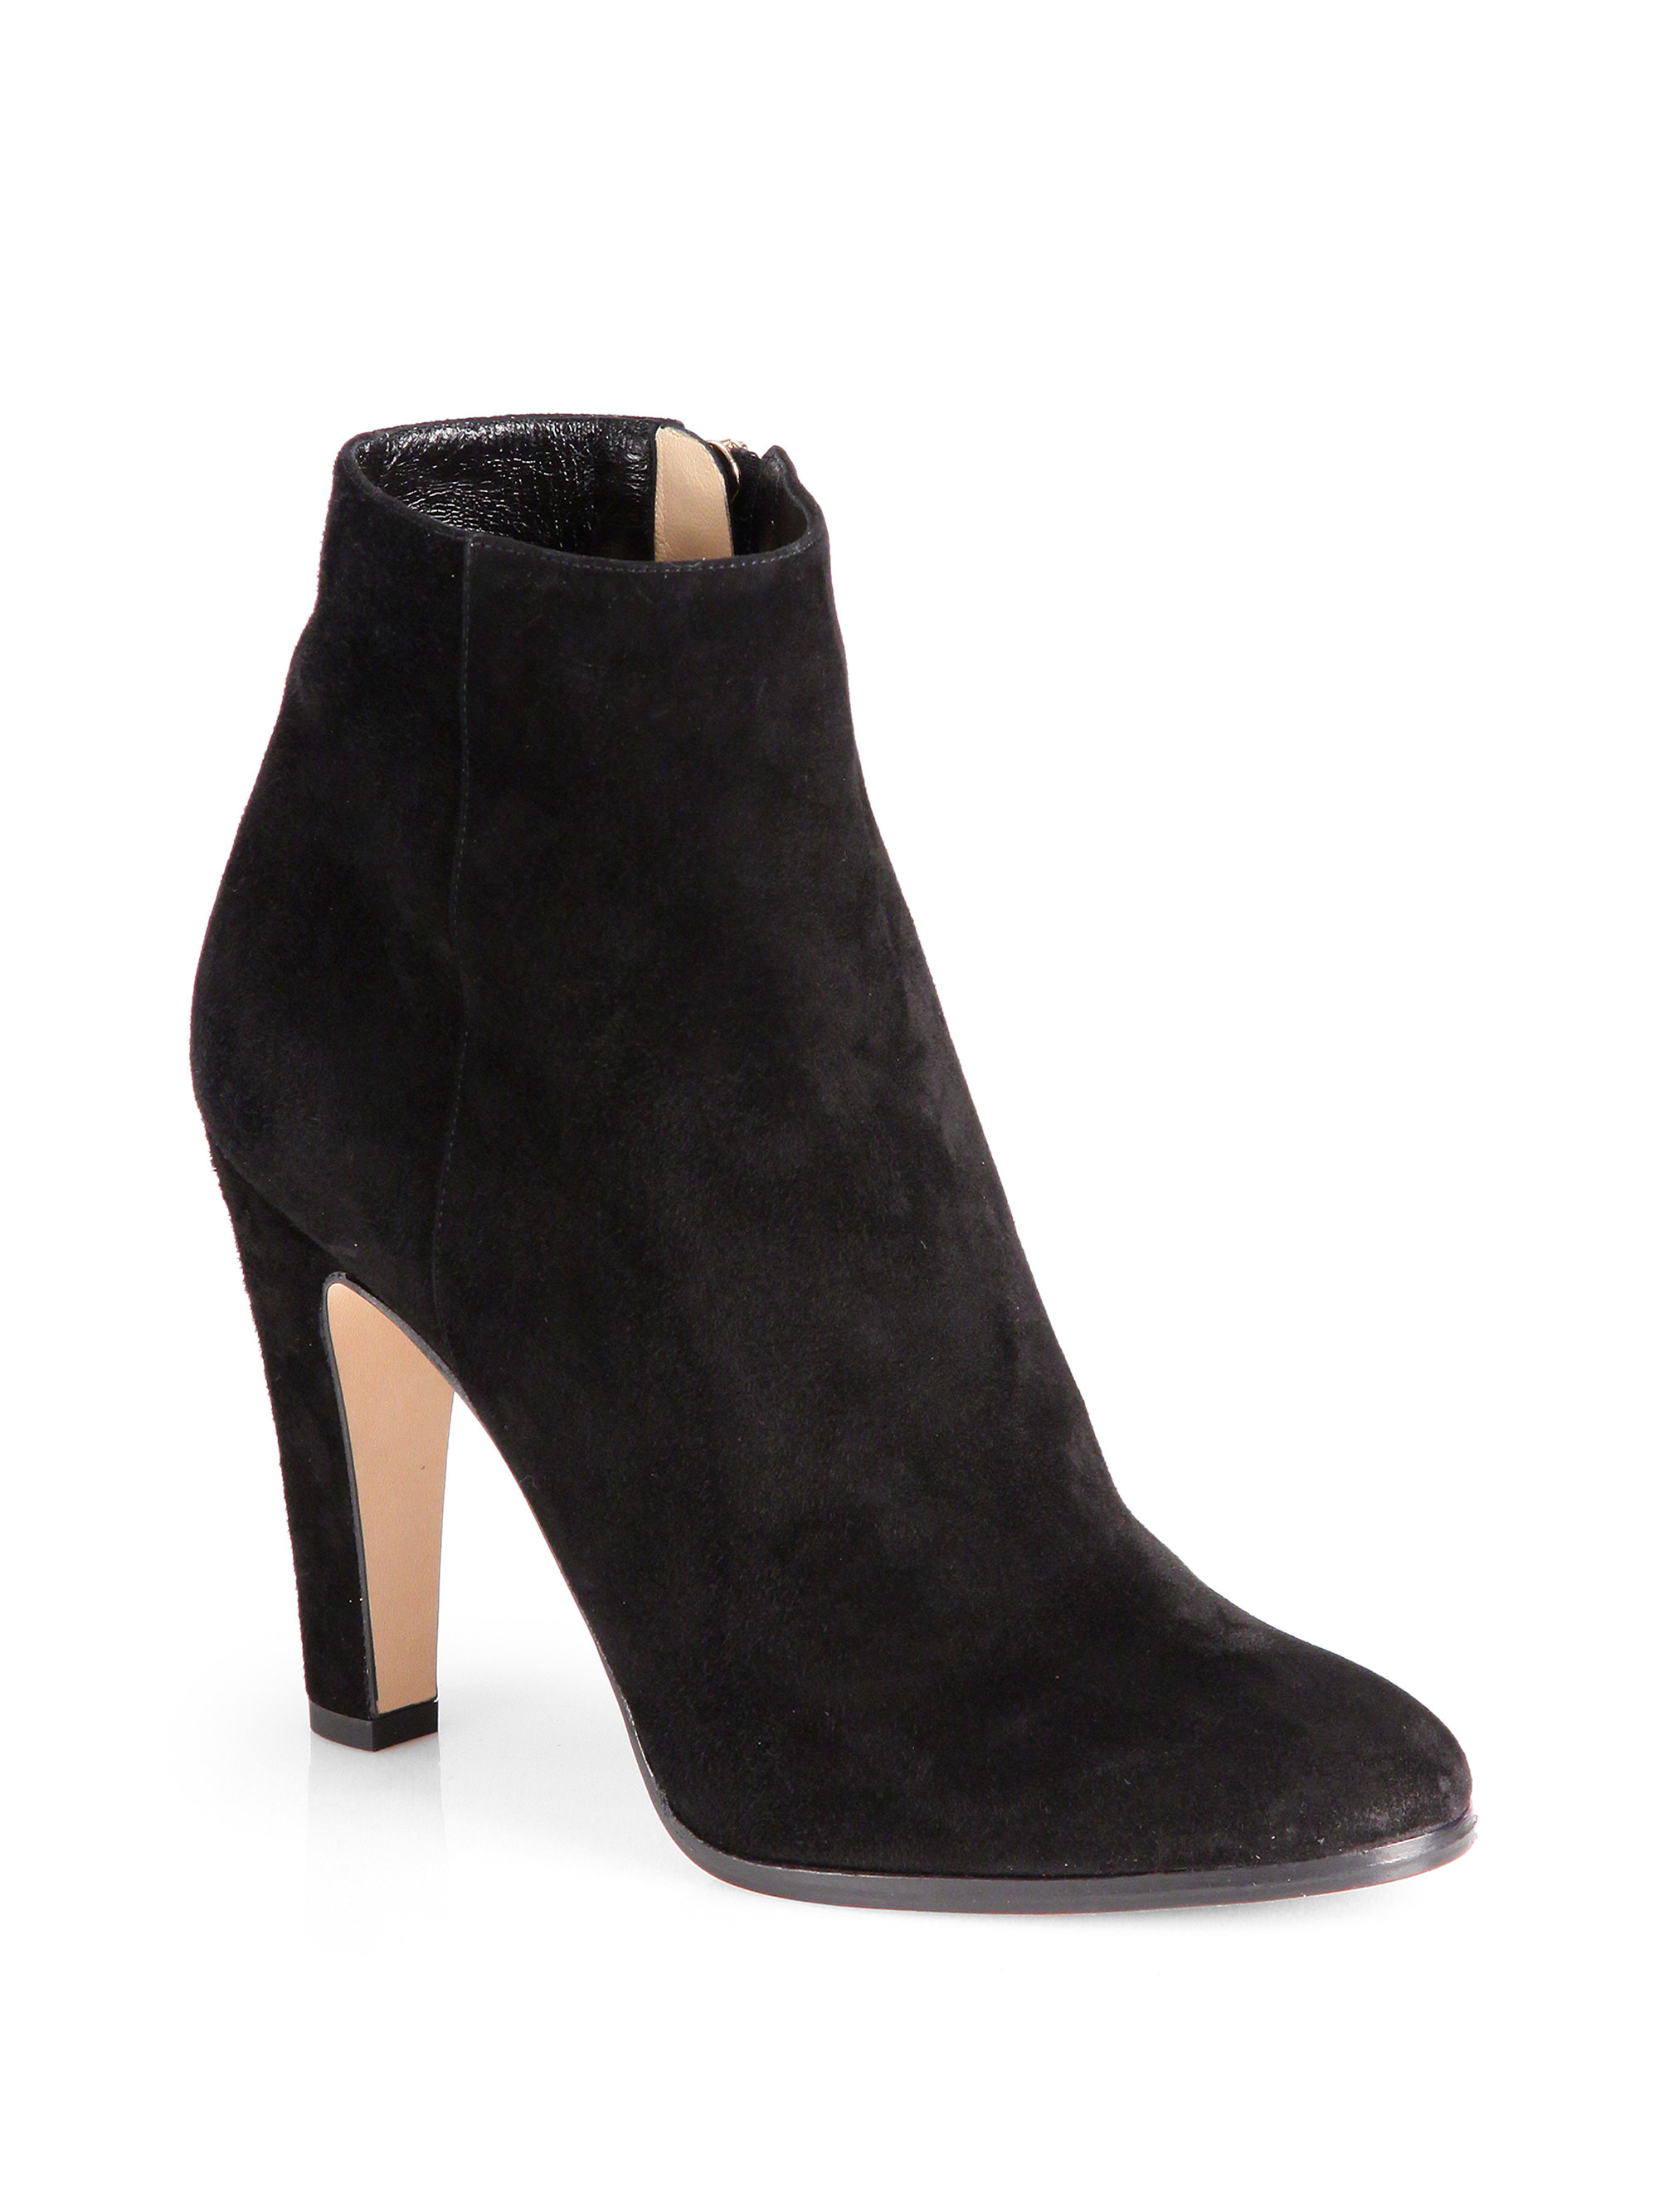 Lyst - Jimmy choo Monday Suede Ankle Boots in Black